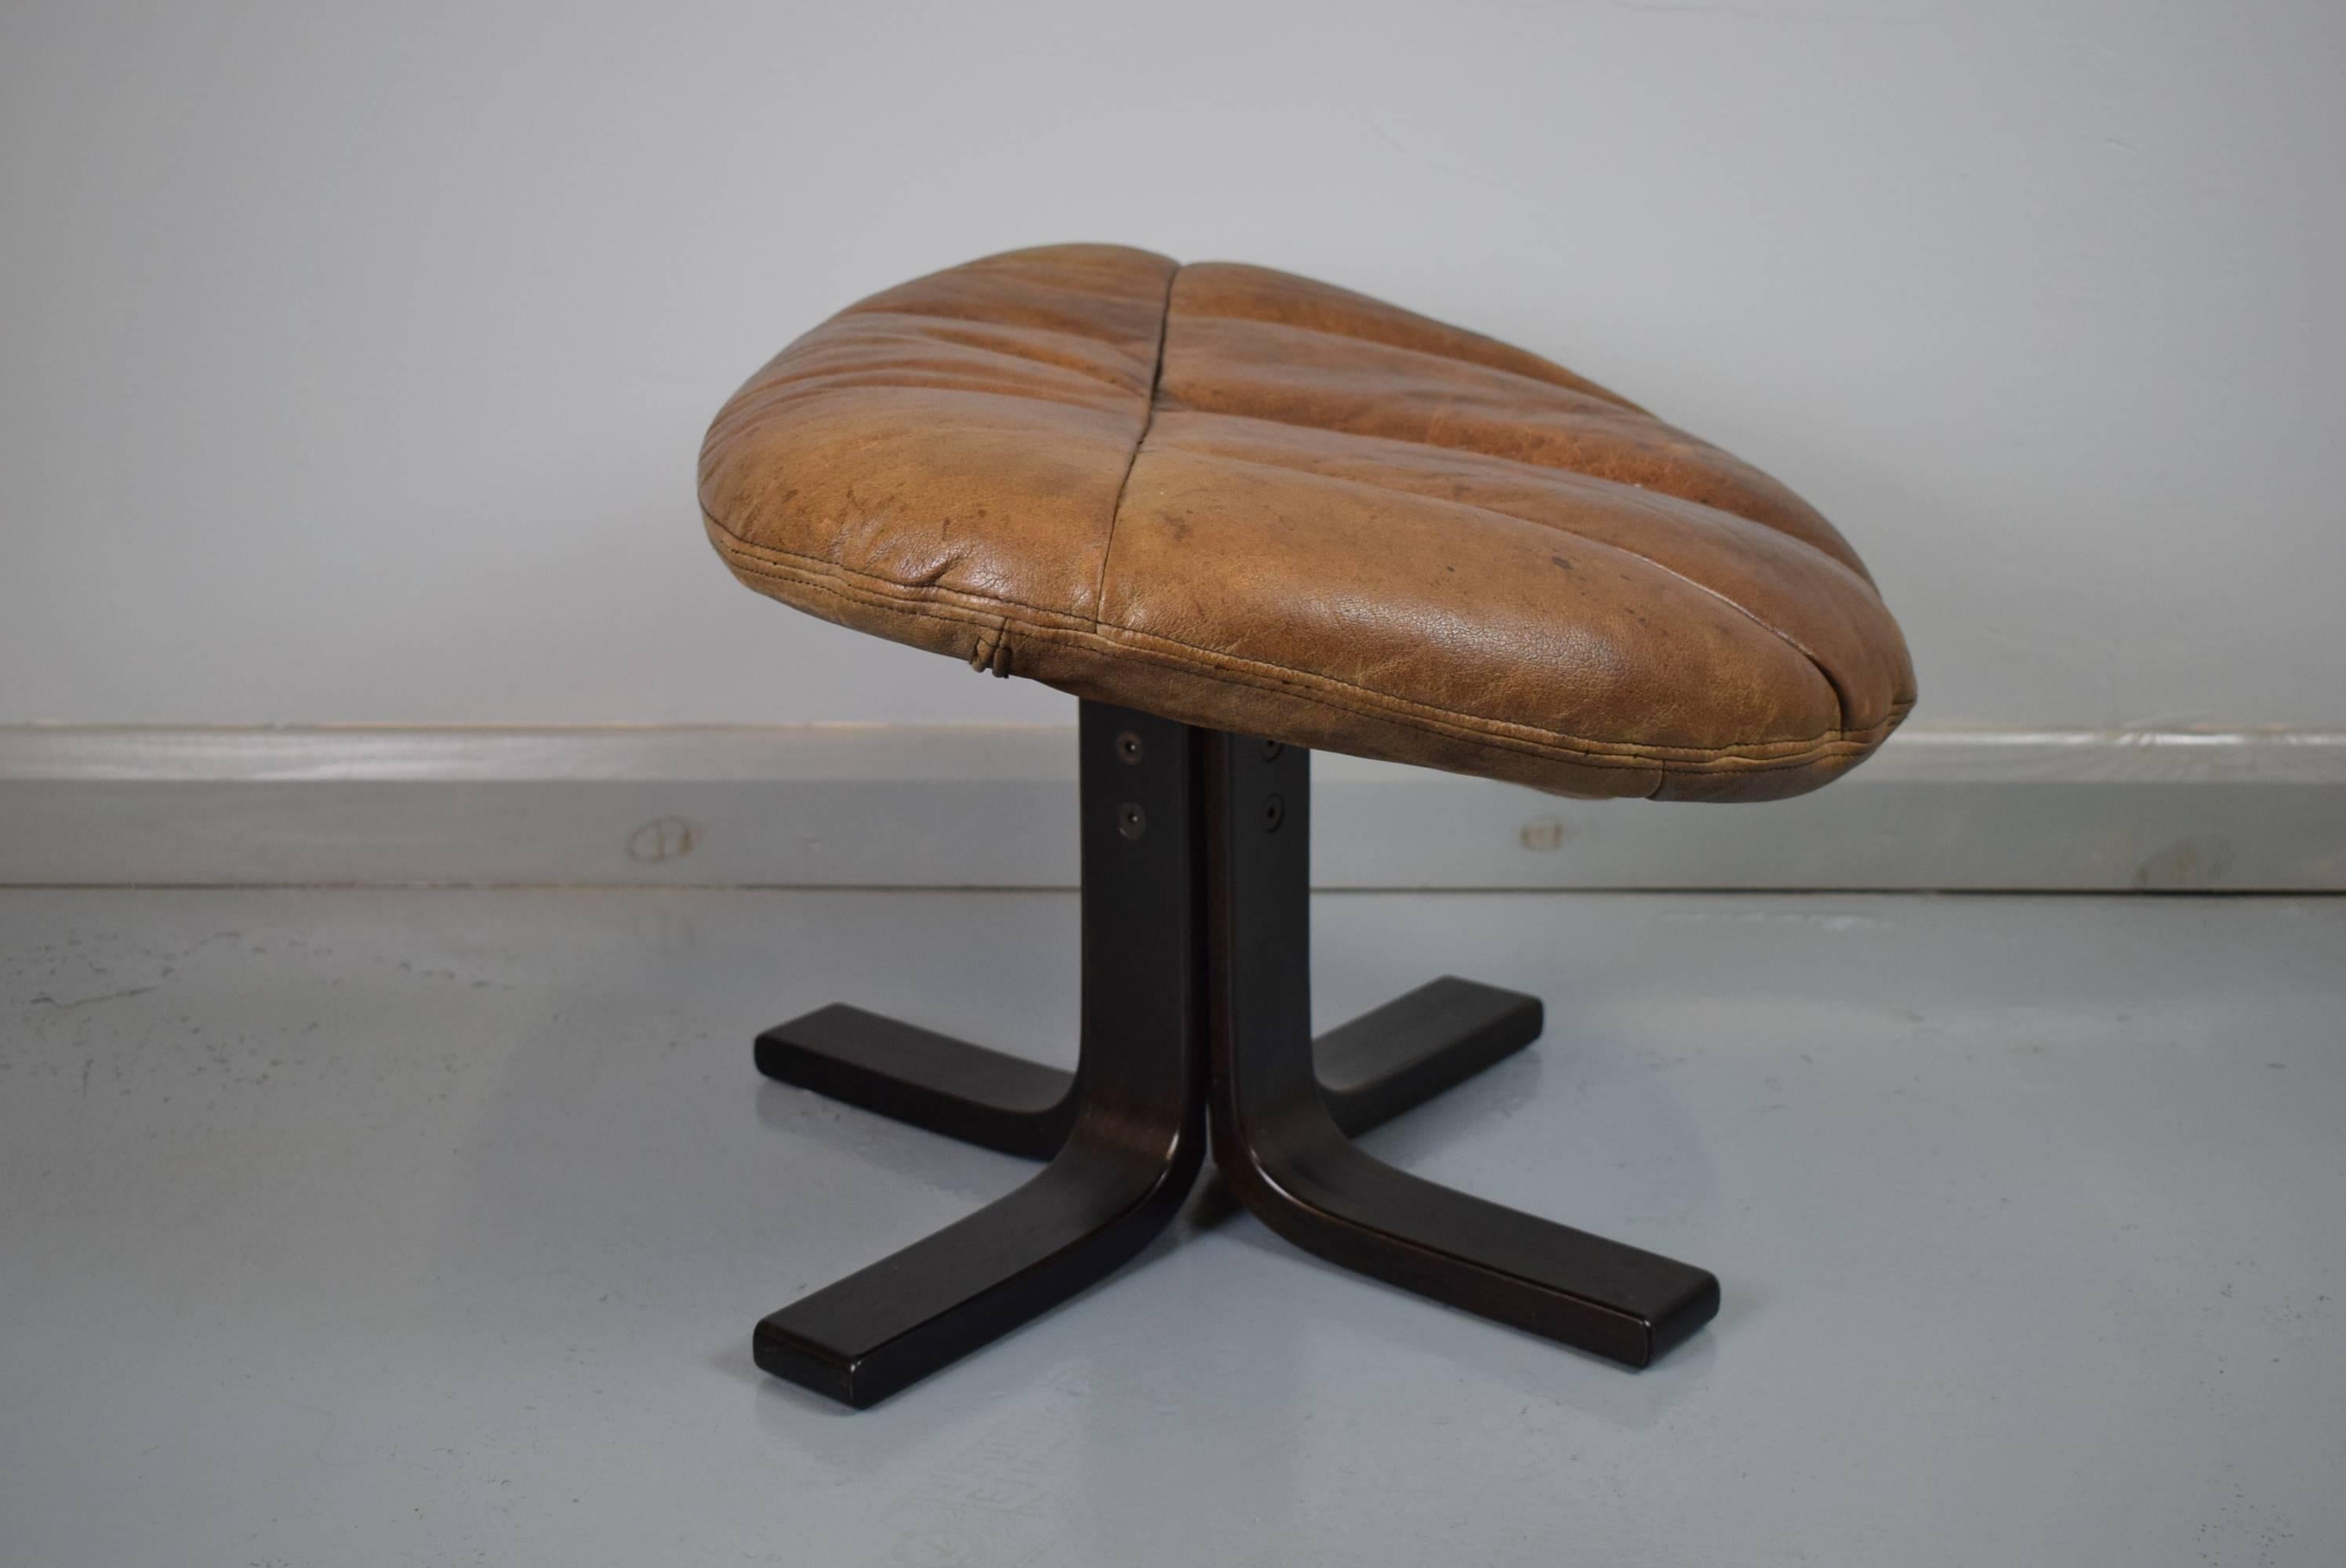 Designer: Danish Design

Manufacturer: Bramin

Country: Denmark

Date: 1970s

Material: Light brown leather and stained beechwood base.

Maximum dimensions: 60 cm wide, 52 cm deep, height to front 39 cm, to the back 30 cm.

Condition: